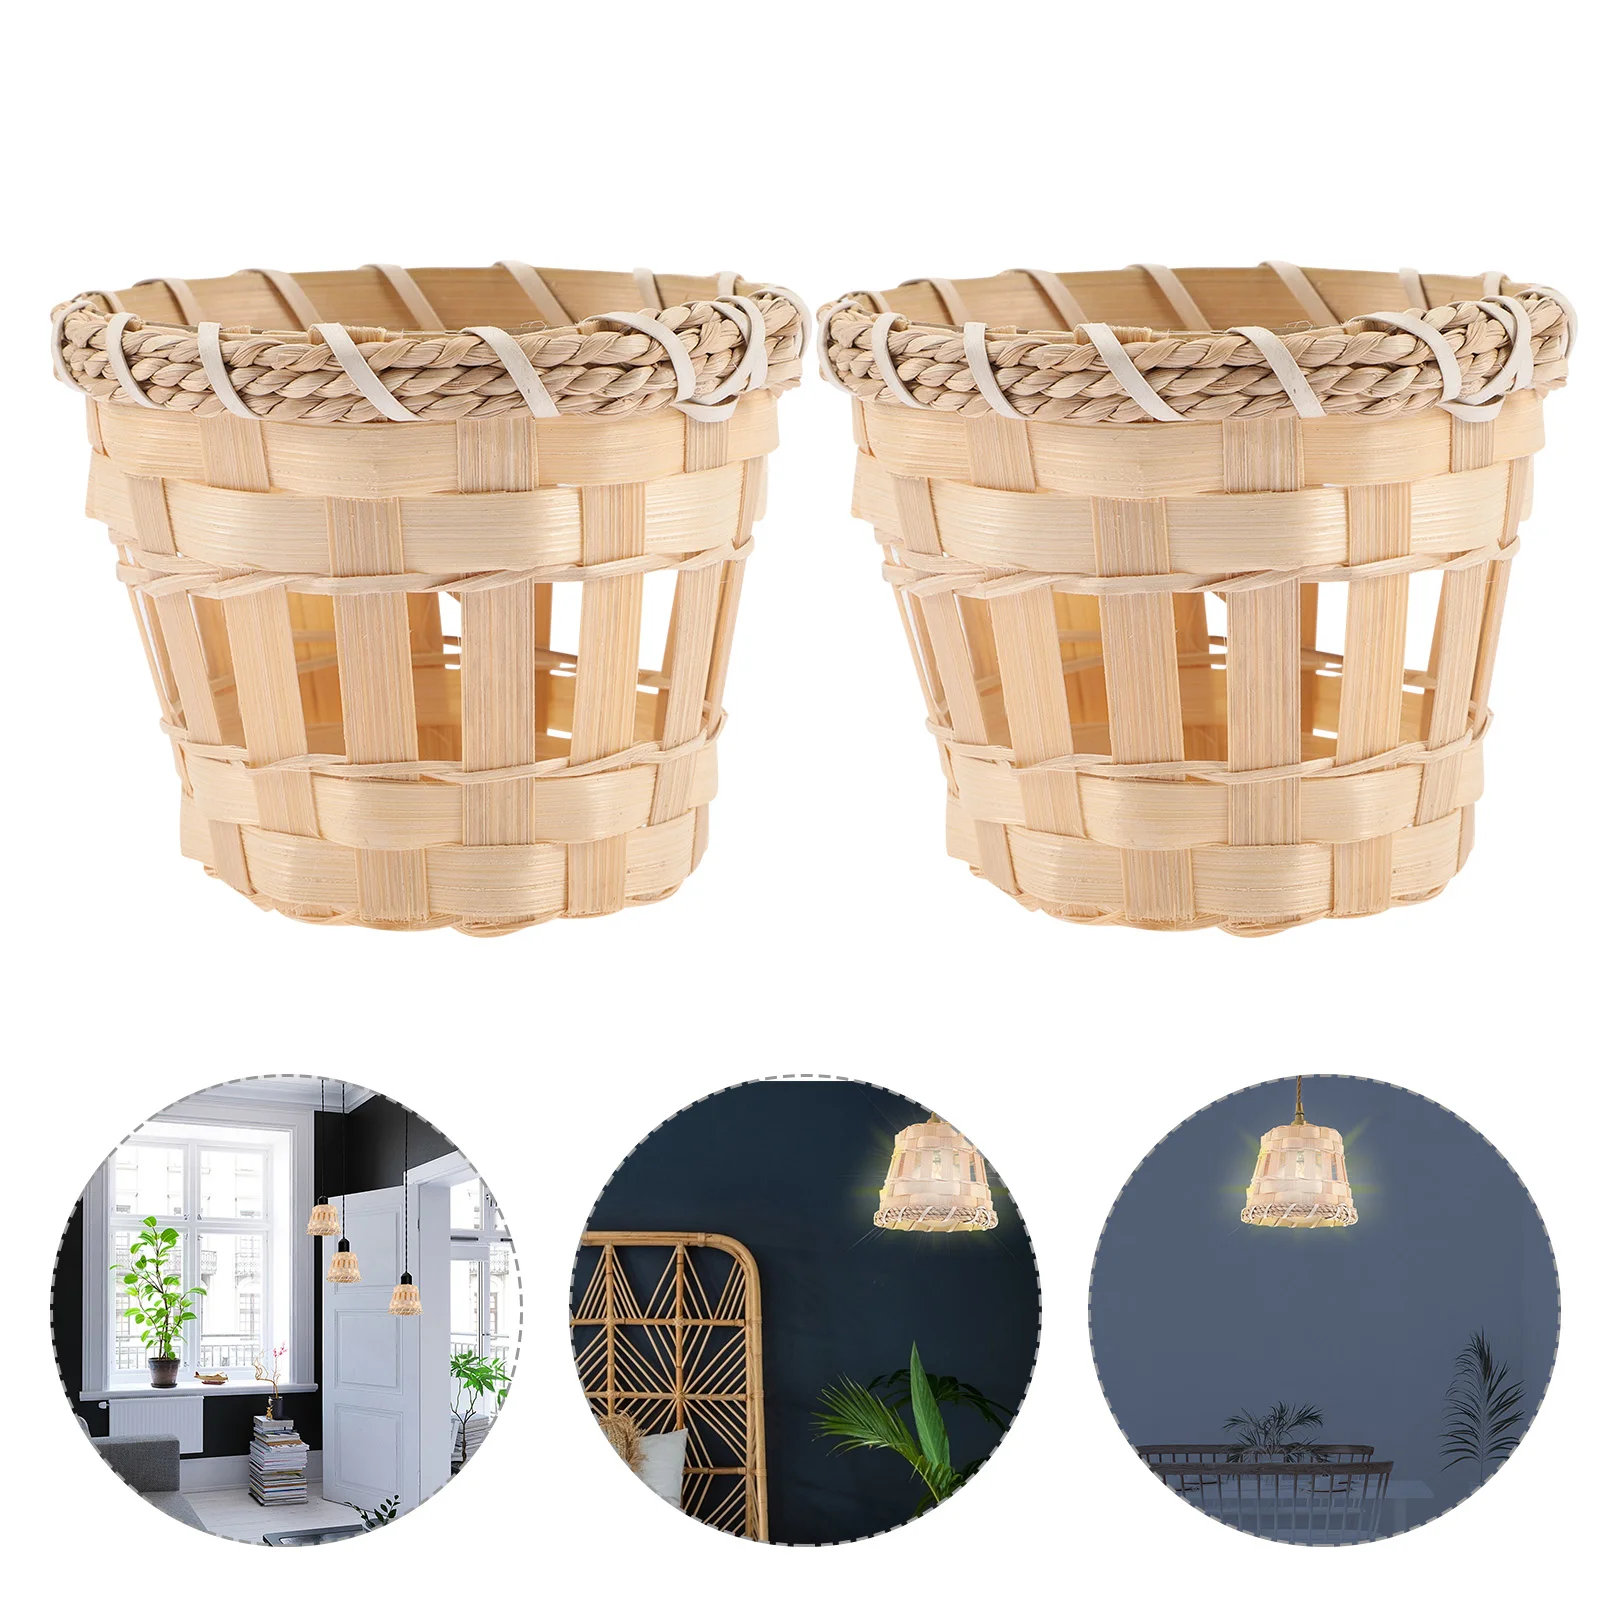 

4 Pcs Small Lampshade Ceiling Cover Shades Country Home Decor Barrel Rattan Baskets Storage Indoor Light Bamboo Household